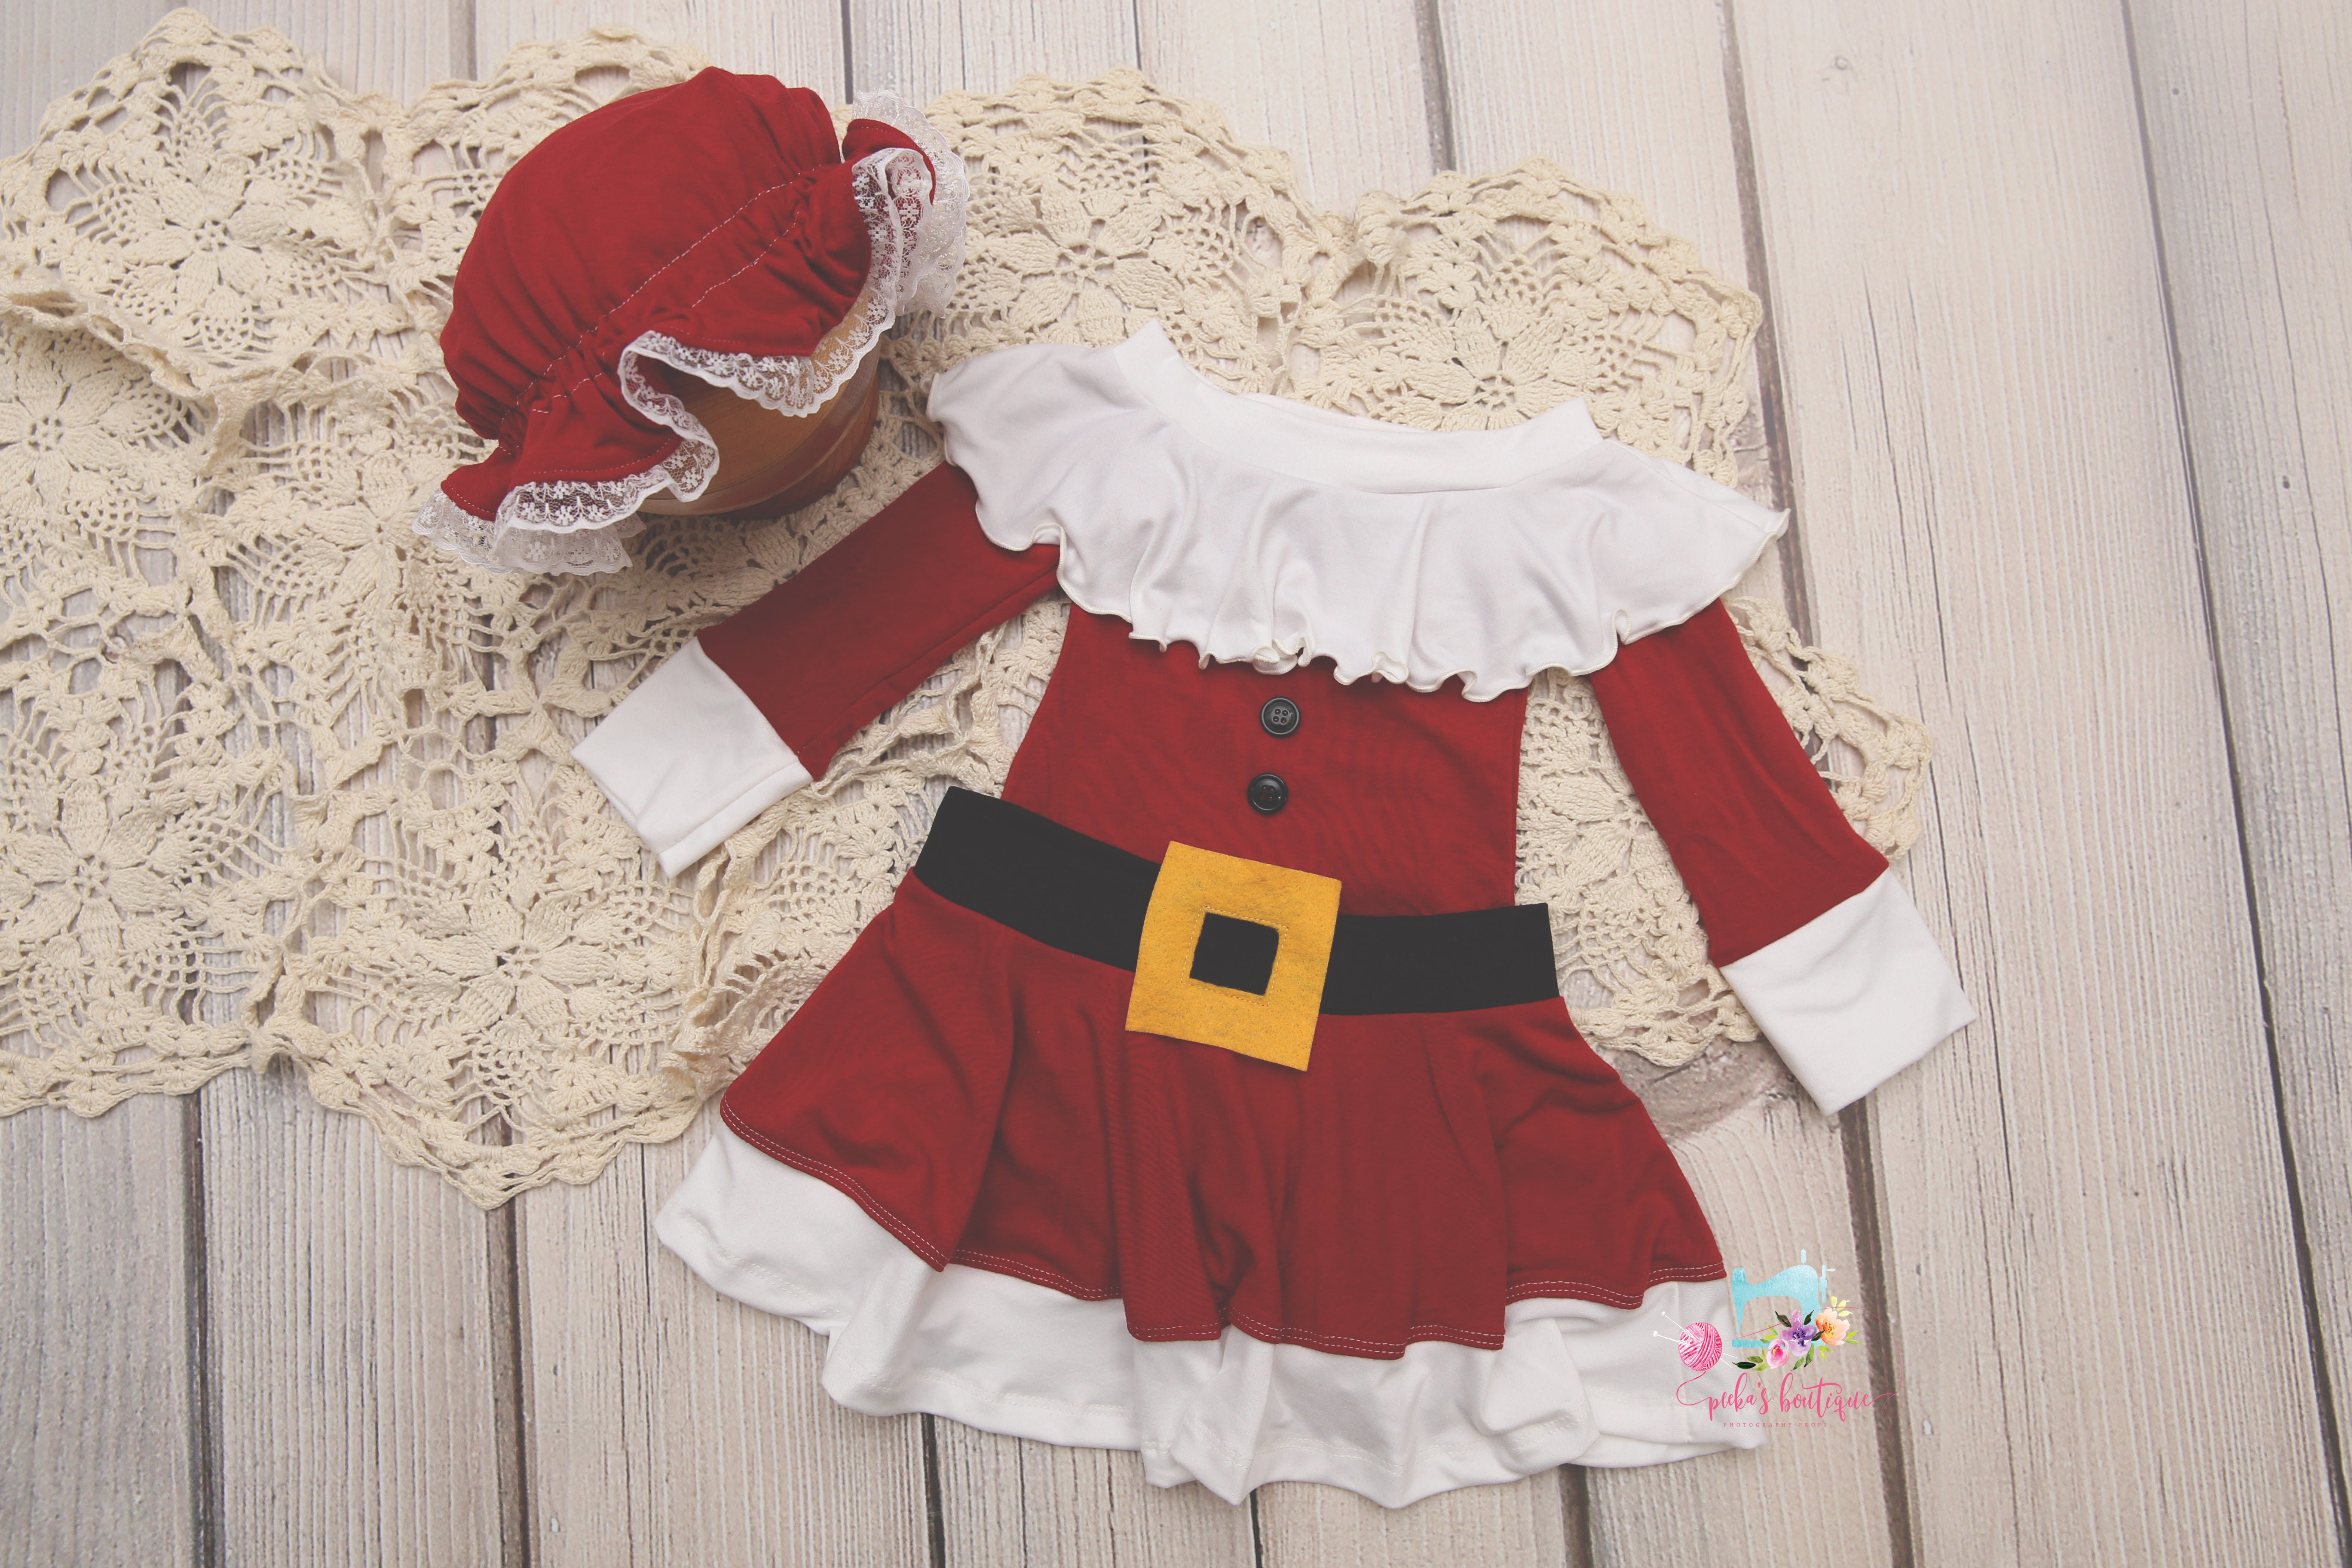 MADE TO ORDER- Christmas Mrs. Claus Suit- Sitter Size